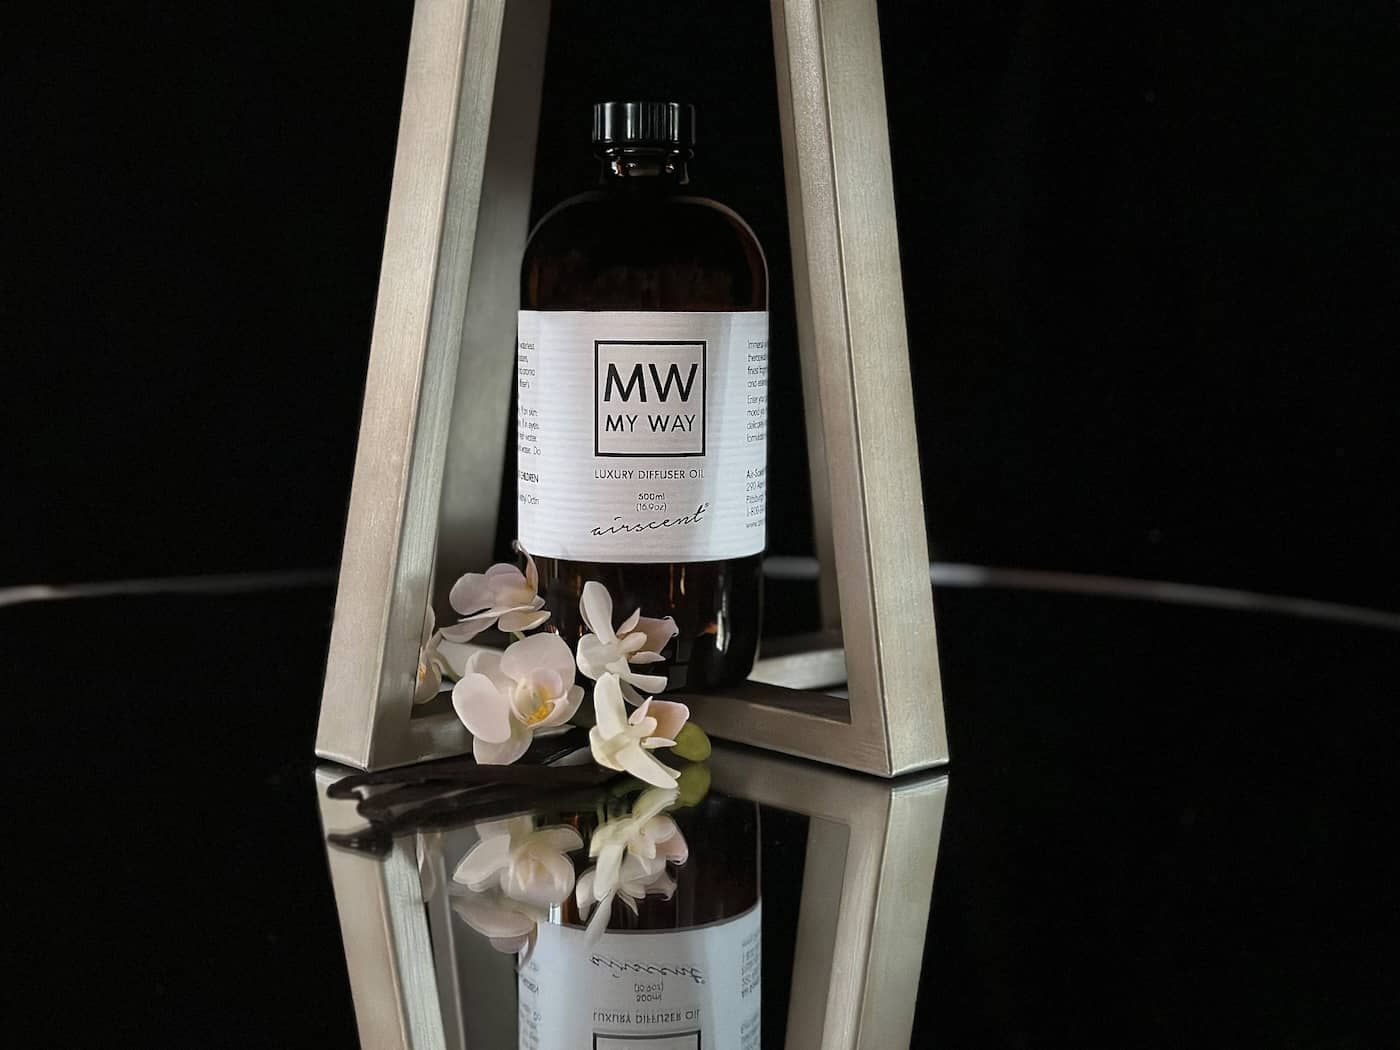 My Way One Hotel Diffuser Oil Hotel Collection fragrance